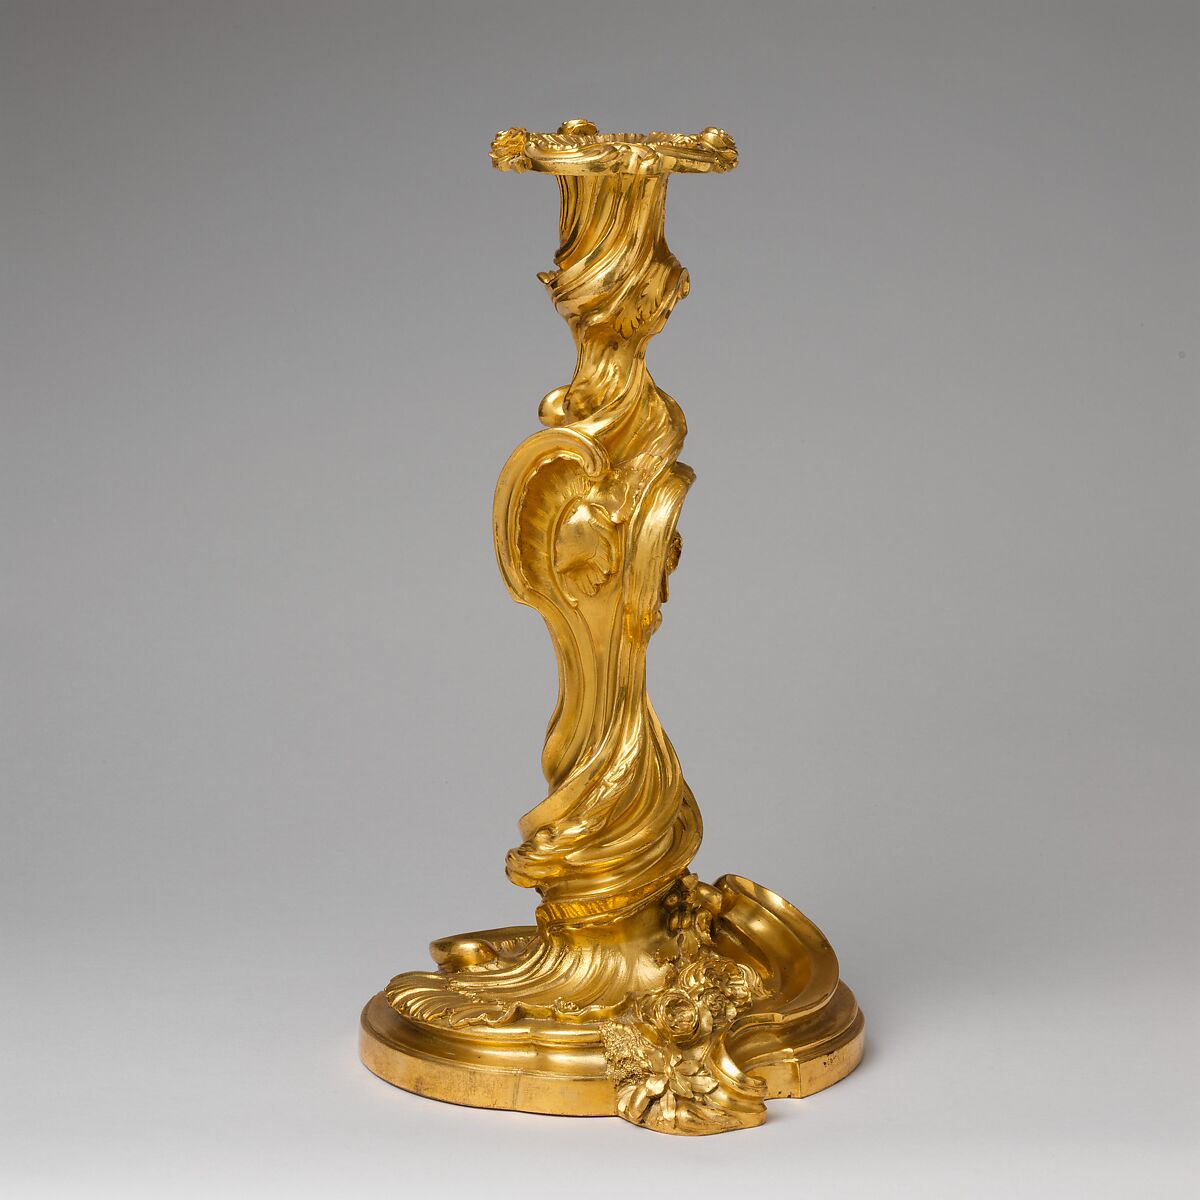 Pair of candlesticks (flambeaux or chandeliers), Juste Aurèle Meissonnier  French, Gilt bronze, French, Paris